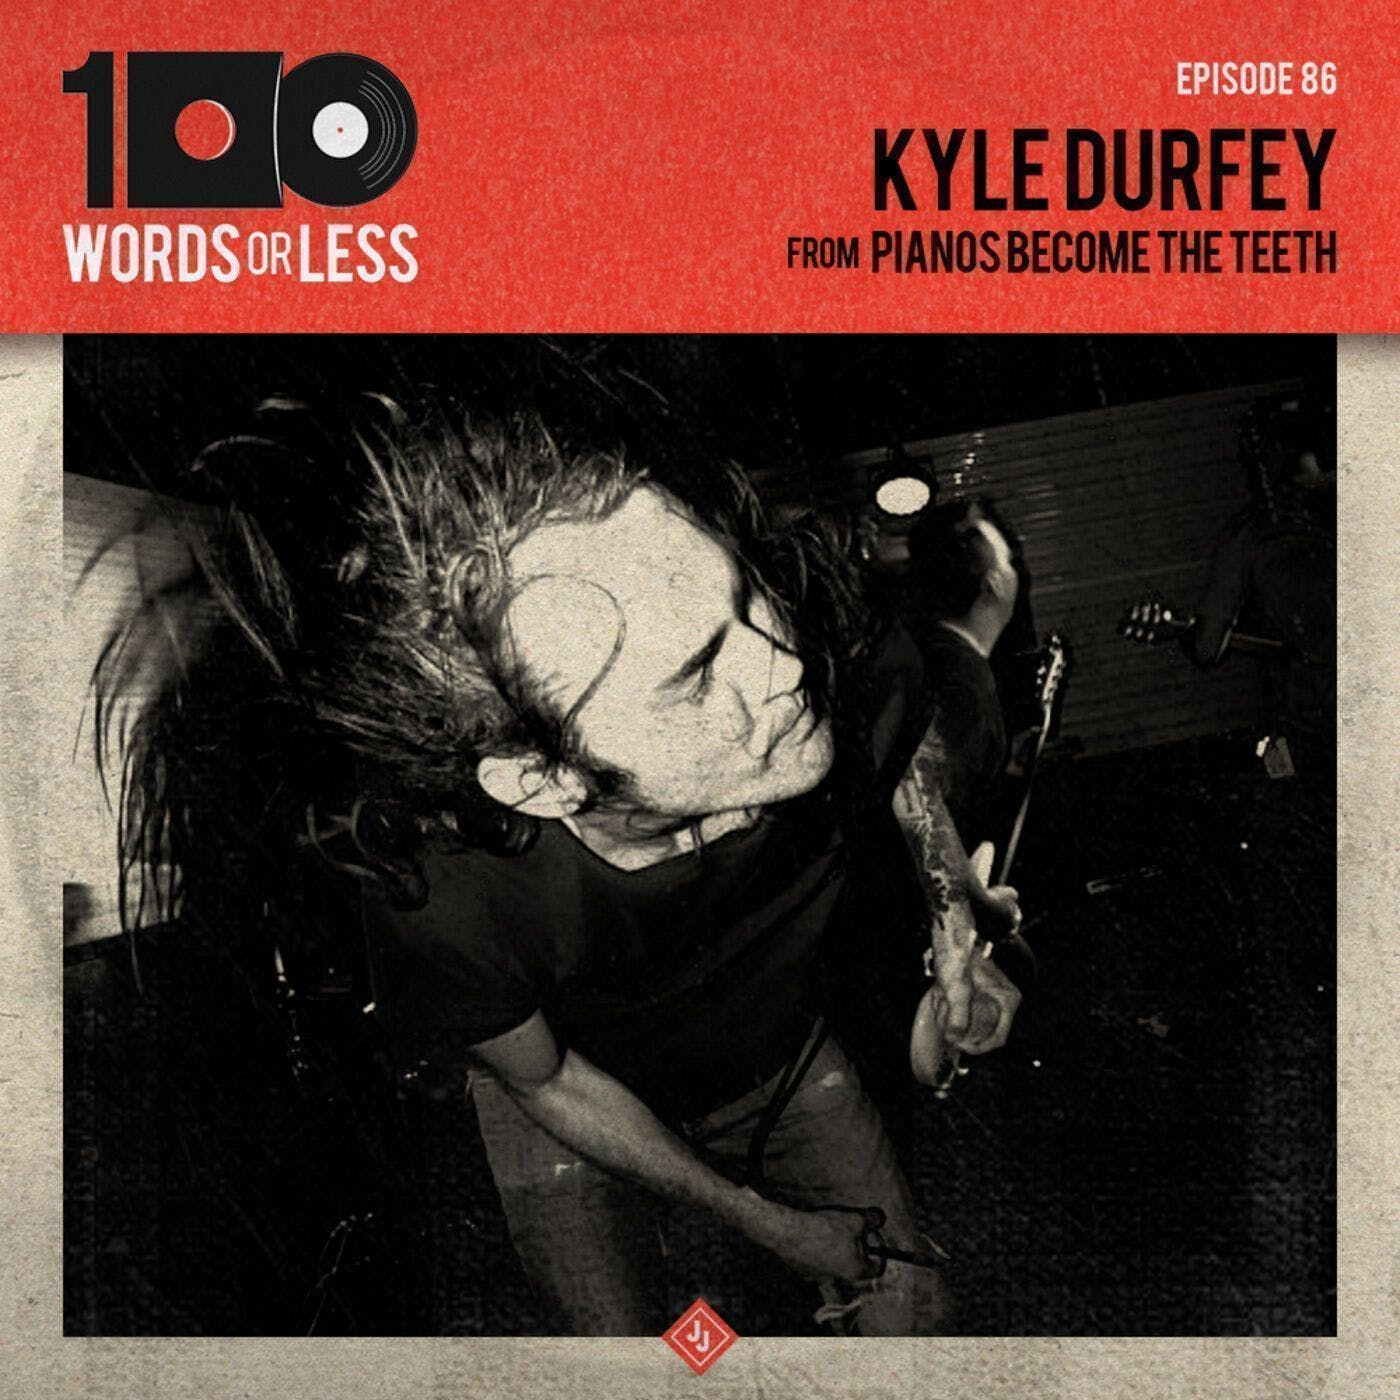 Kyle Durfey from Pianos Become the Teeth